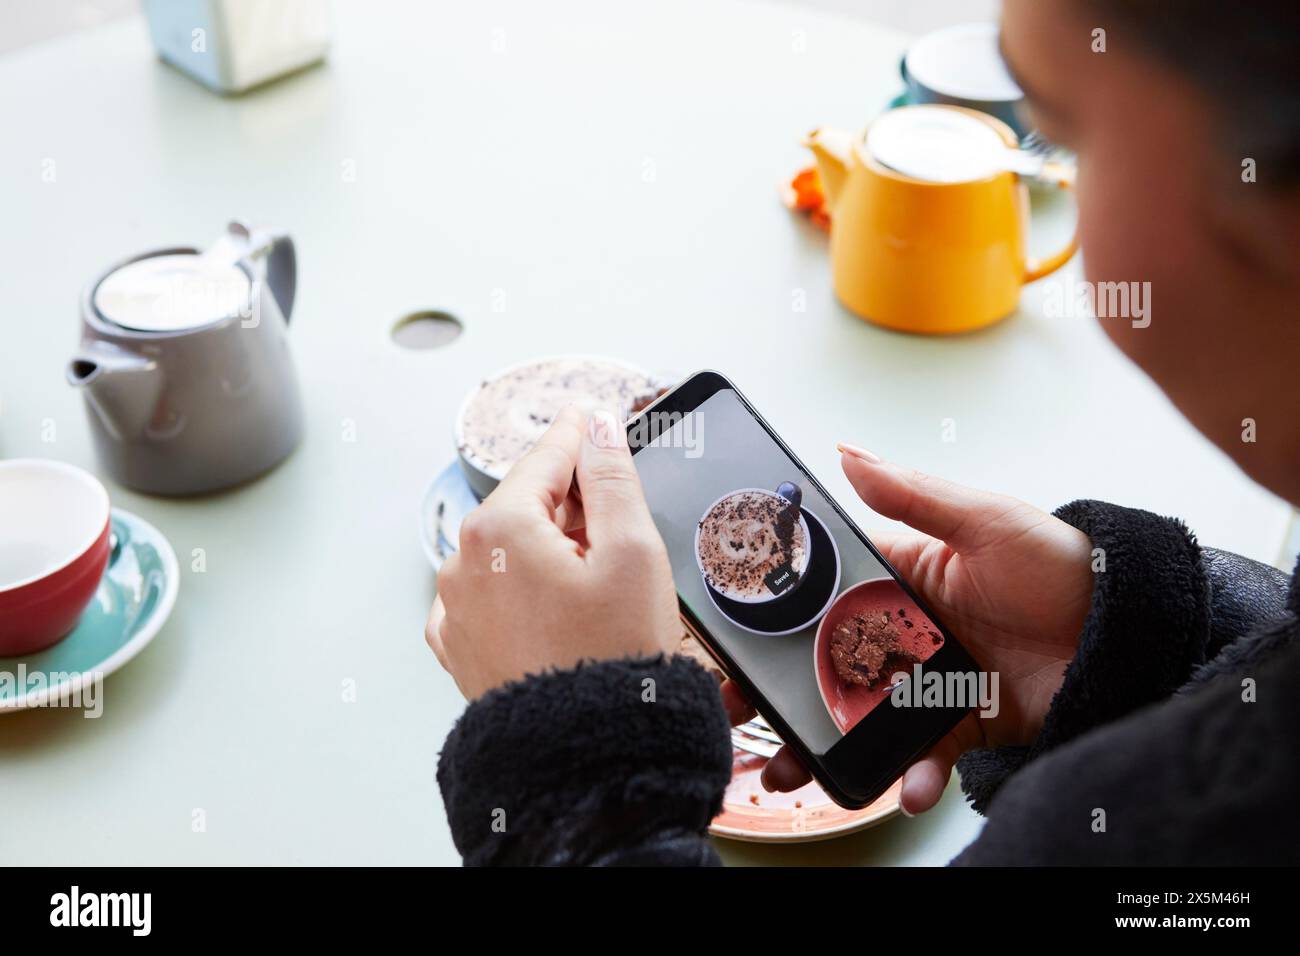 Woman using smart phone to take pictures of food Stock Photo